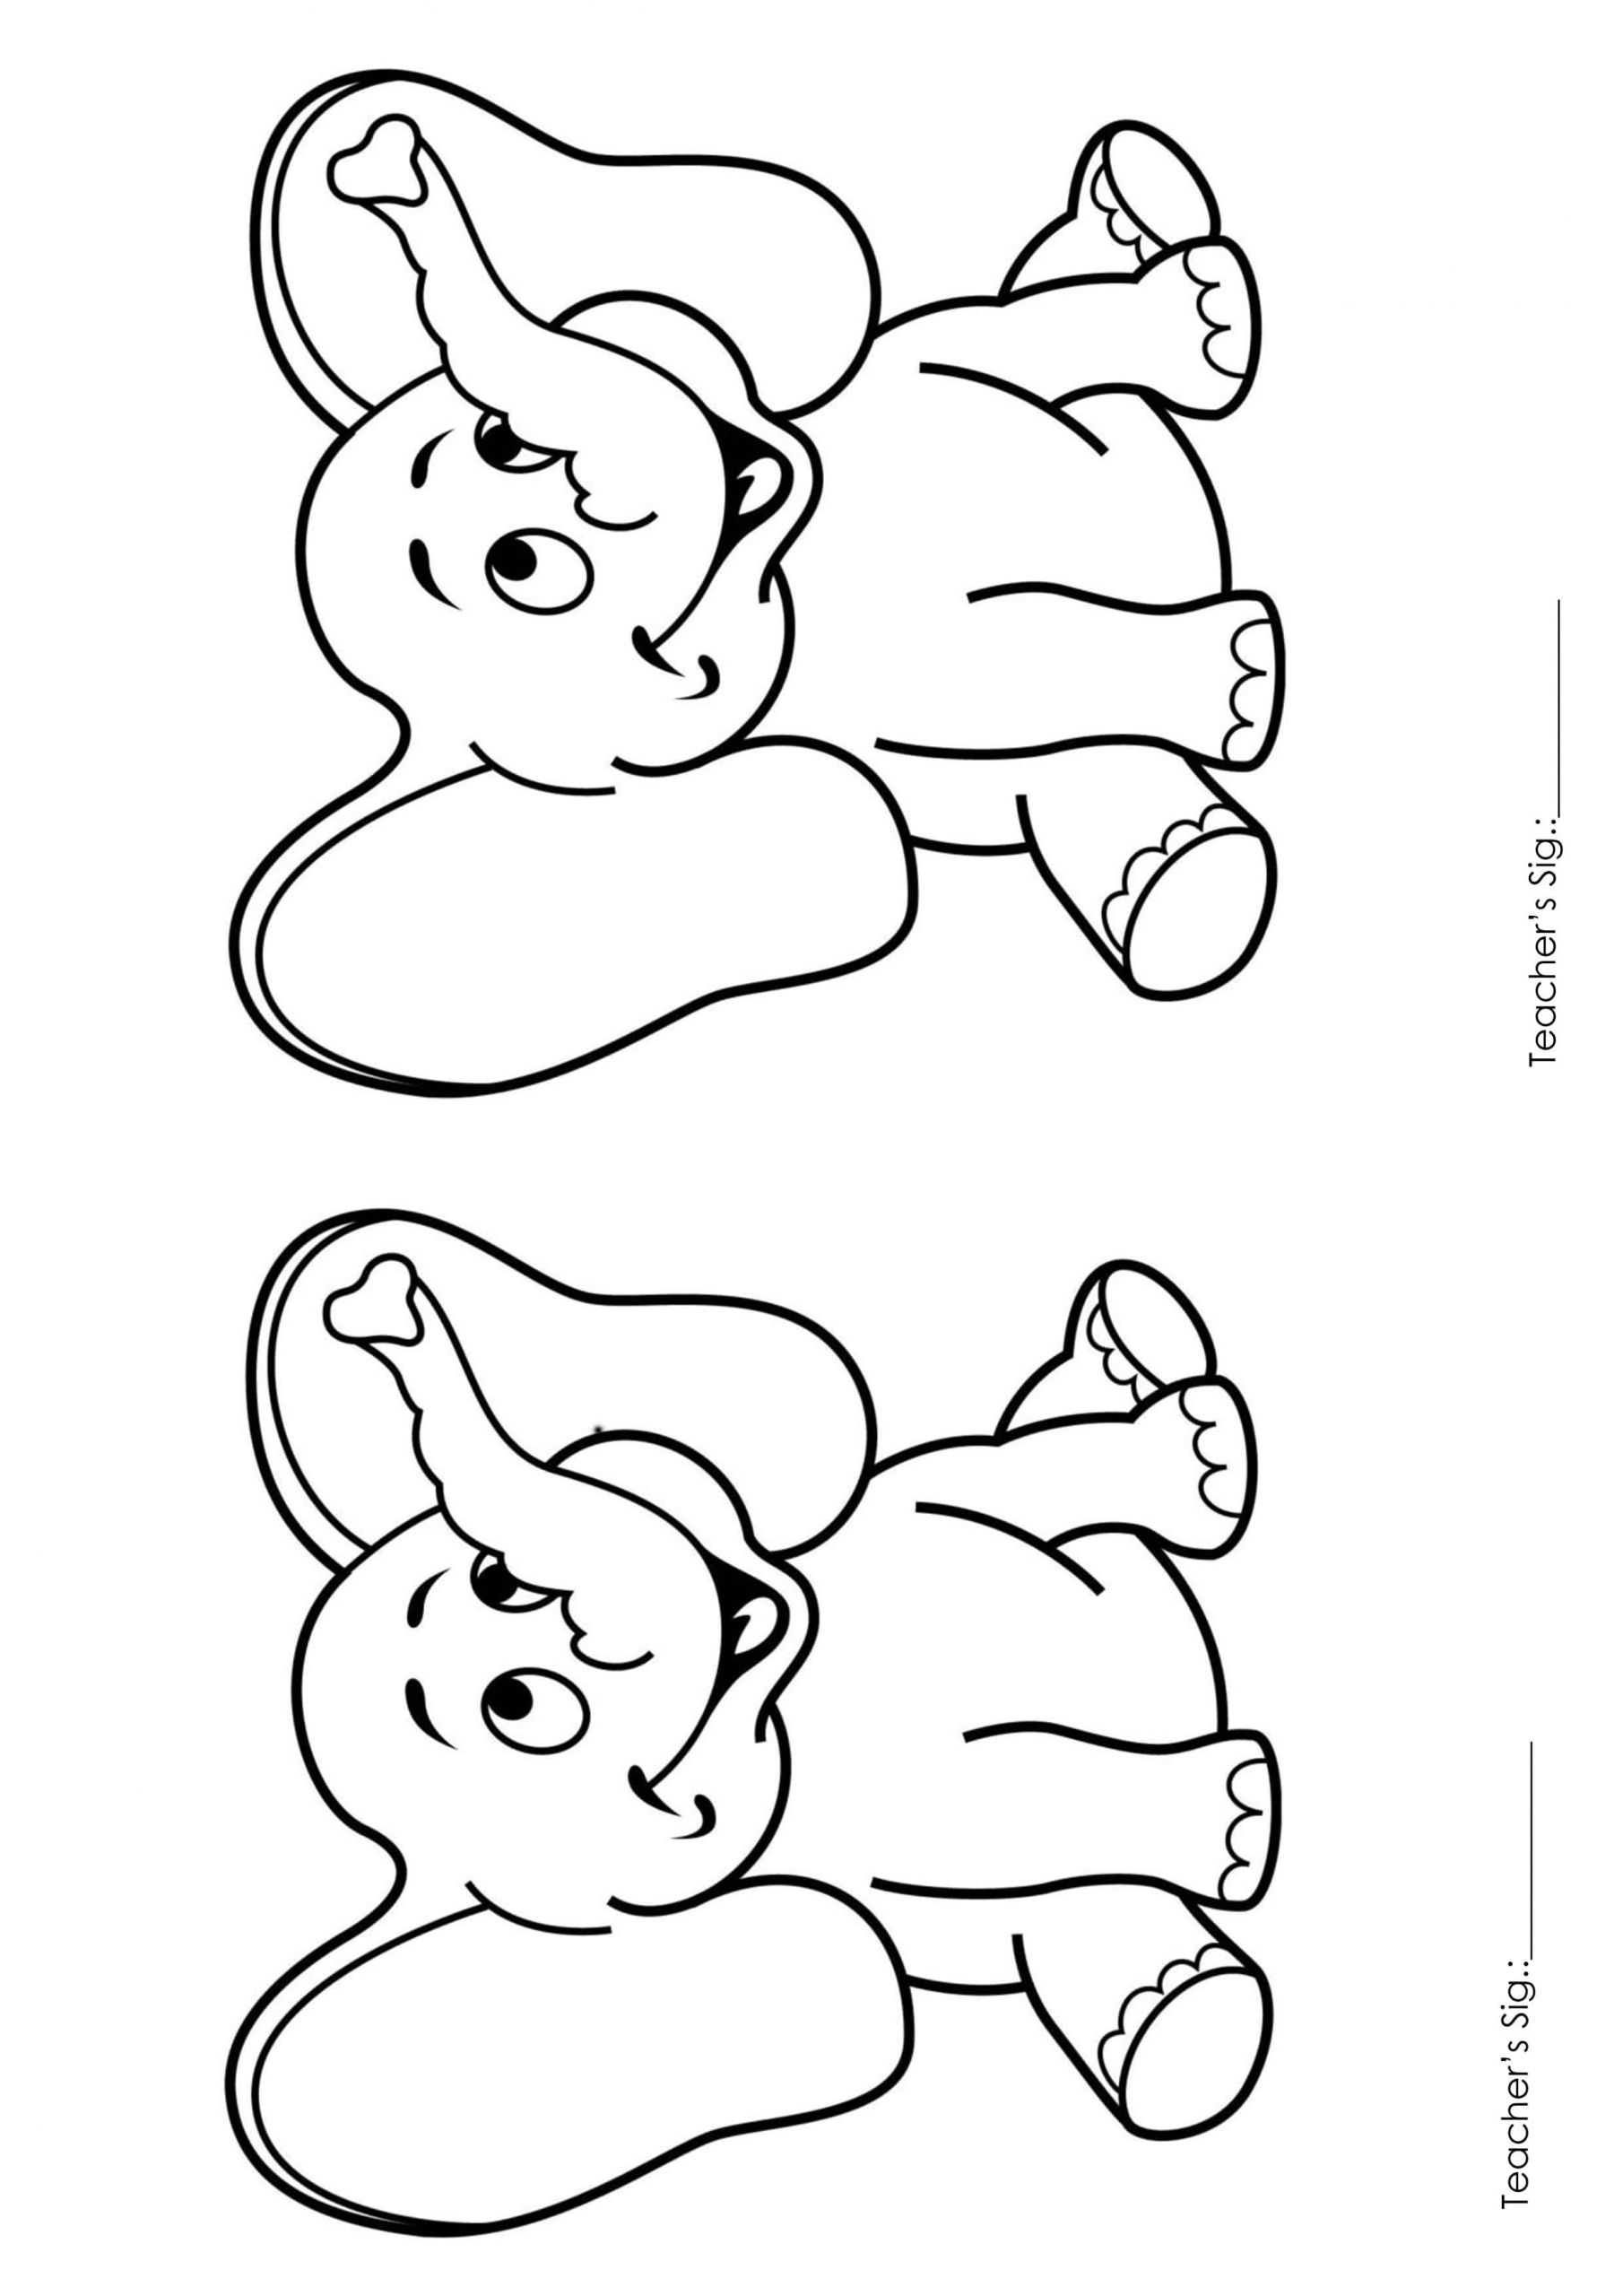 Coloring Pages For Kids For Free
 Printable Coloring Pages for Kids Playgroup A4 Size 1